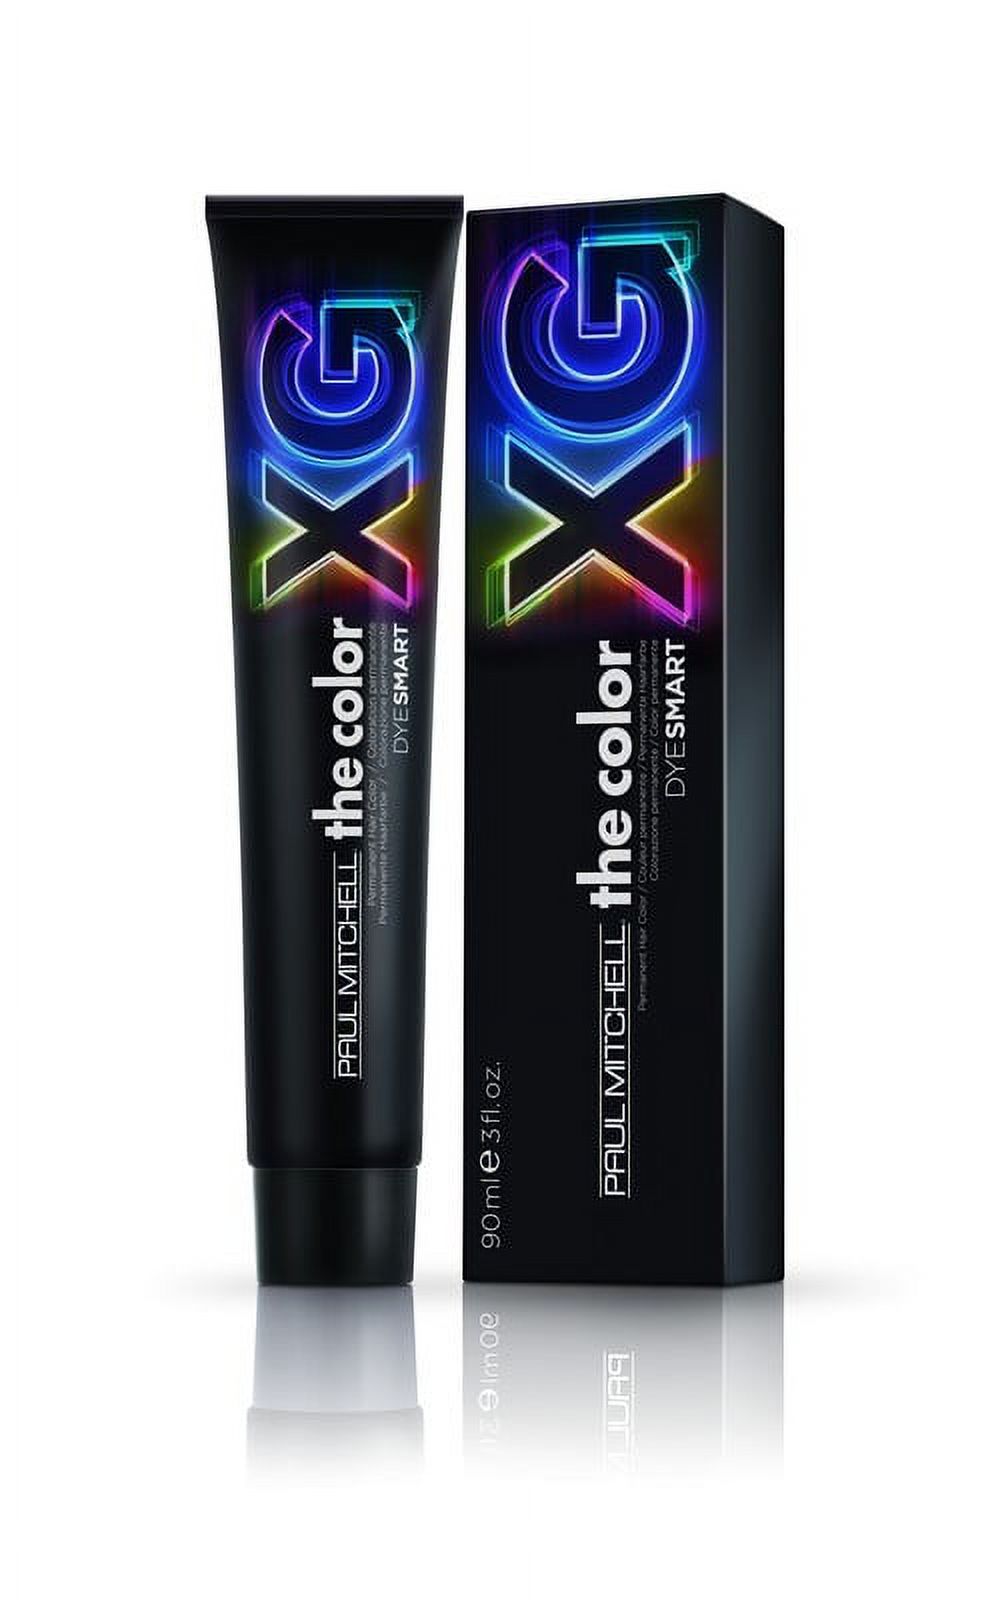 Paul Mitchell The Color XG 4A 4/1 DyeSmart Permanent Hair Color 3 oz - image 1 of 2